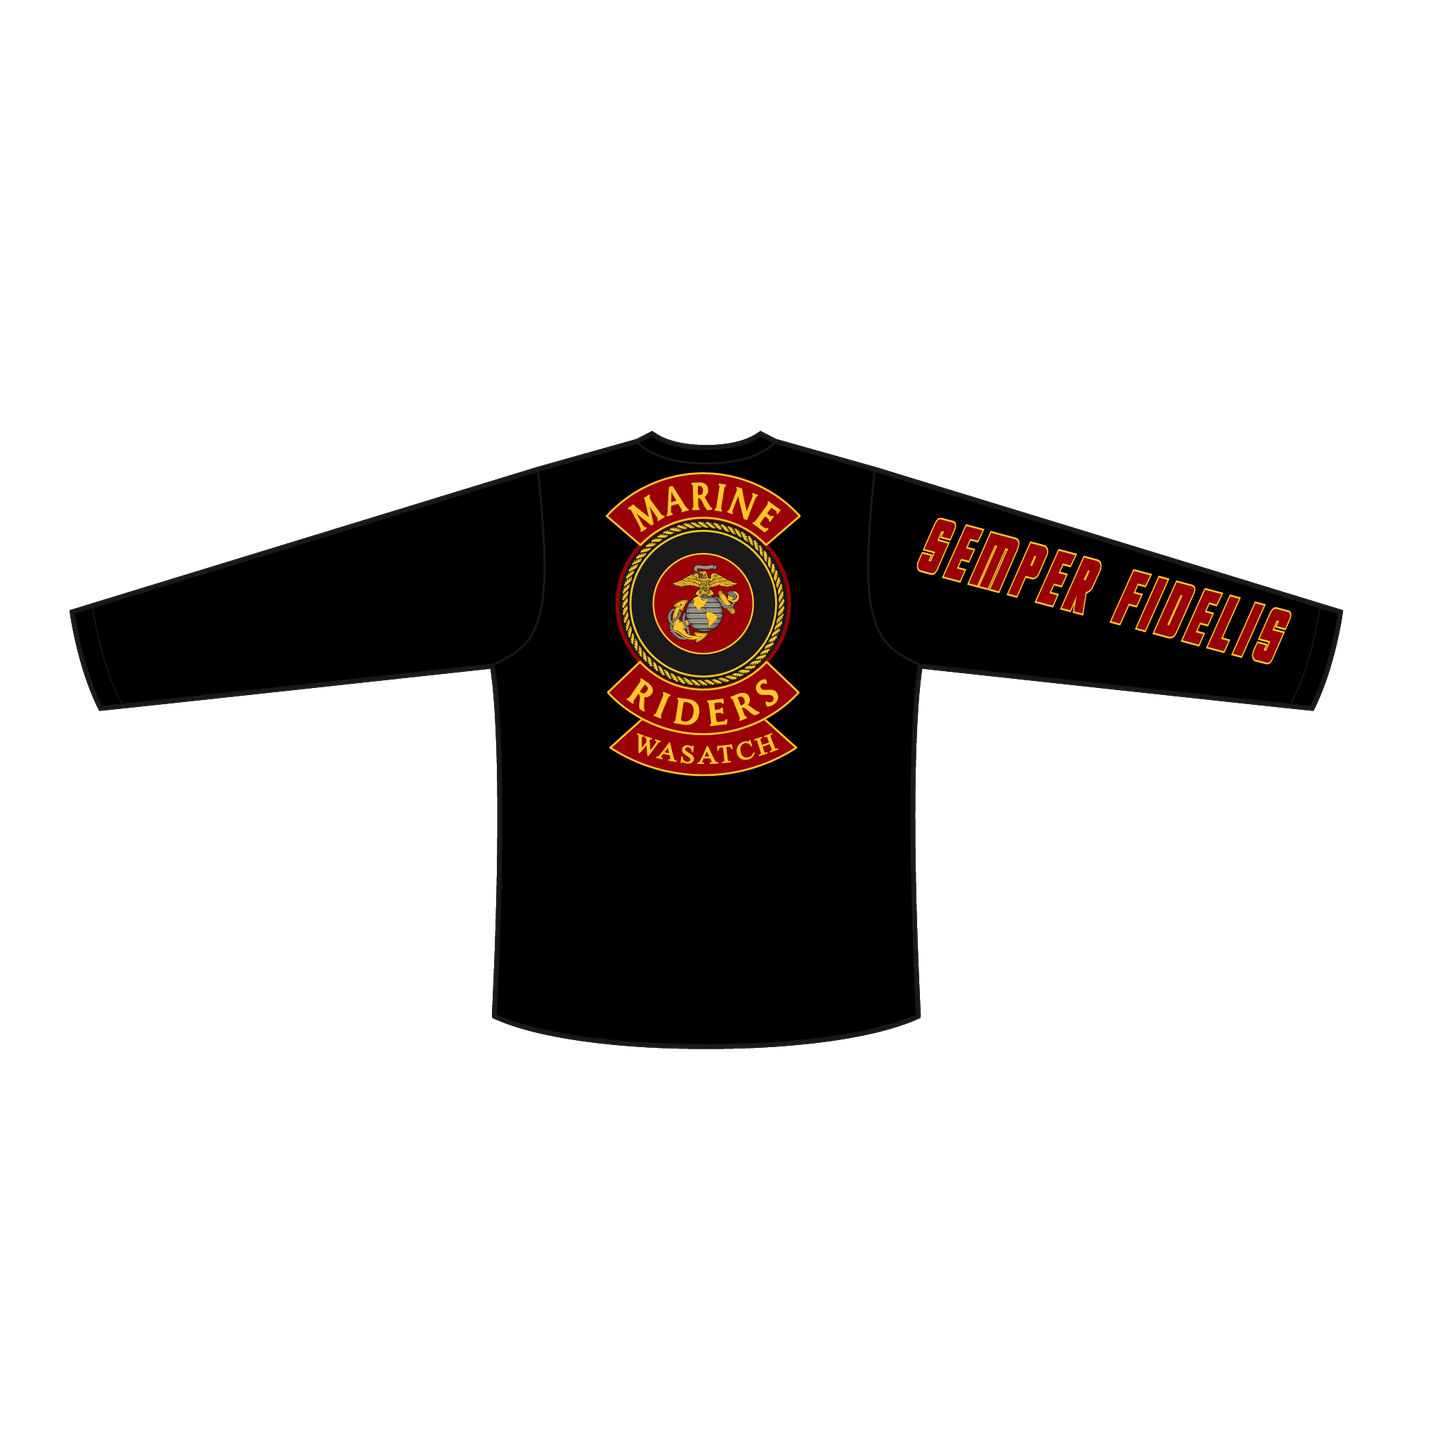 Adult Marine Riders Black Long Sleeve T-Shirt (Wasatch Black Out)